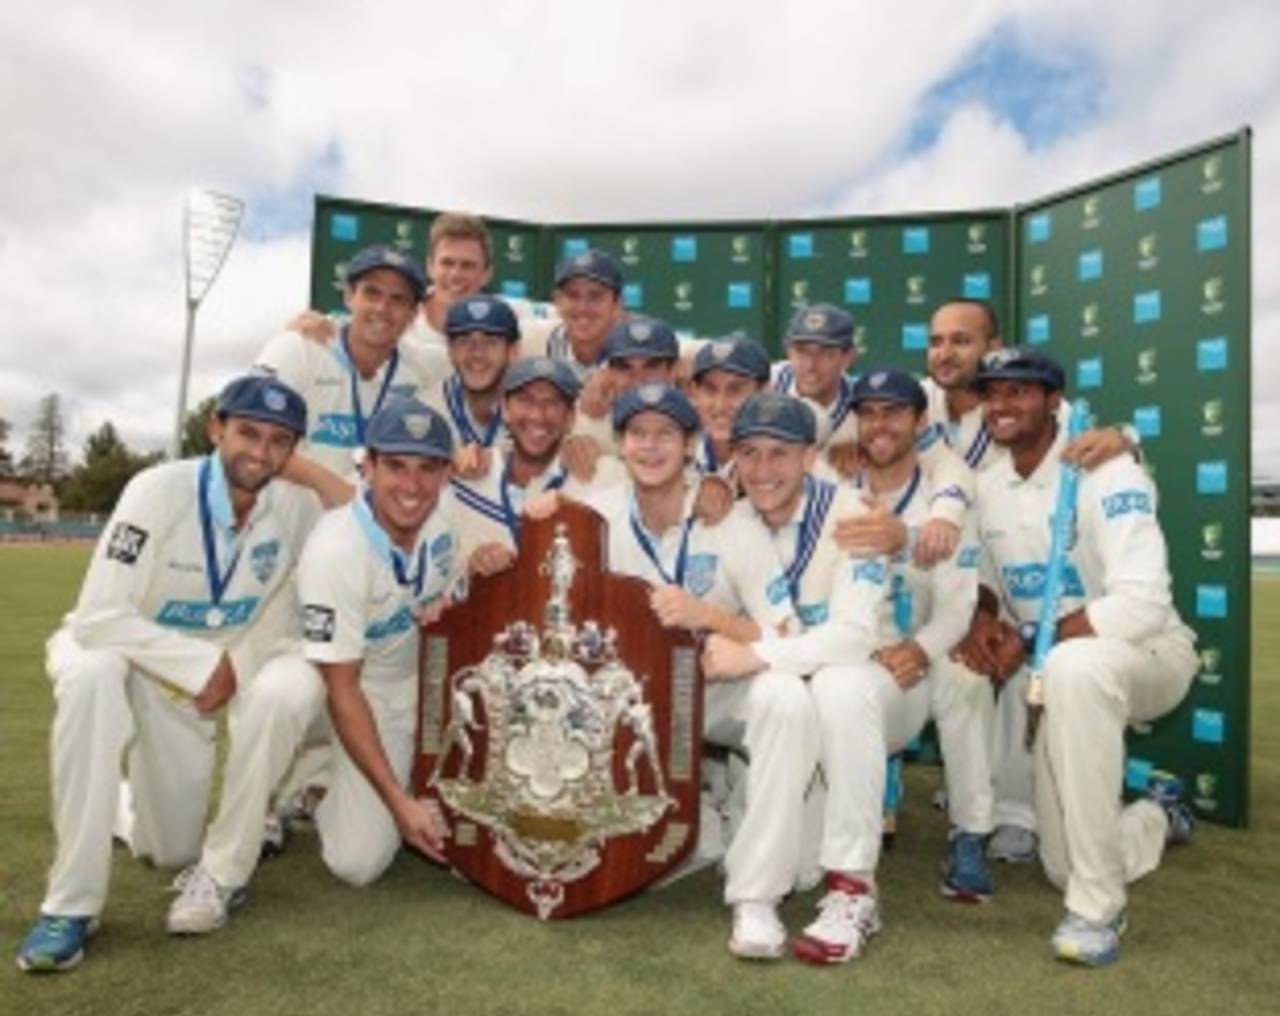 The Sheffield Shield champions, New South Wales, will play in Newcastle and Wagga Wagga this summer&nbsp;&nbsp;&bull;&nbsp;&nbsp;Getty Images